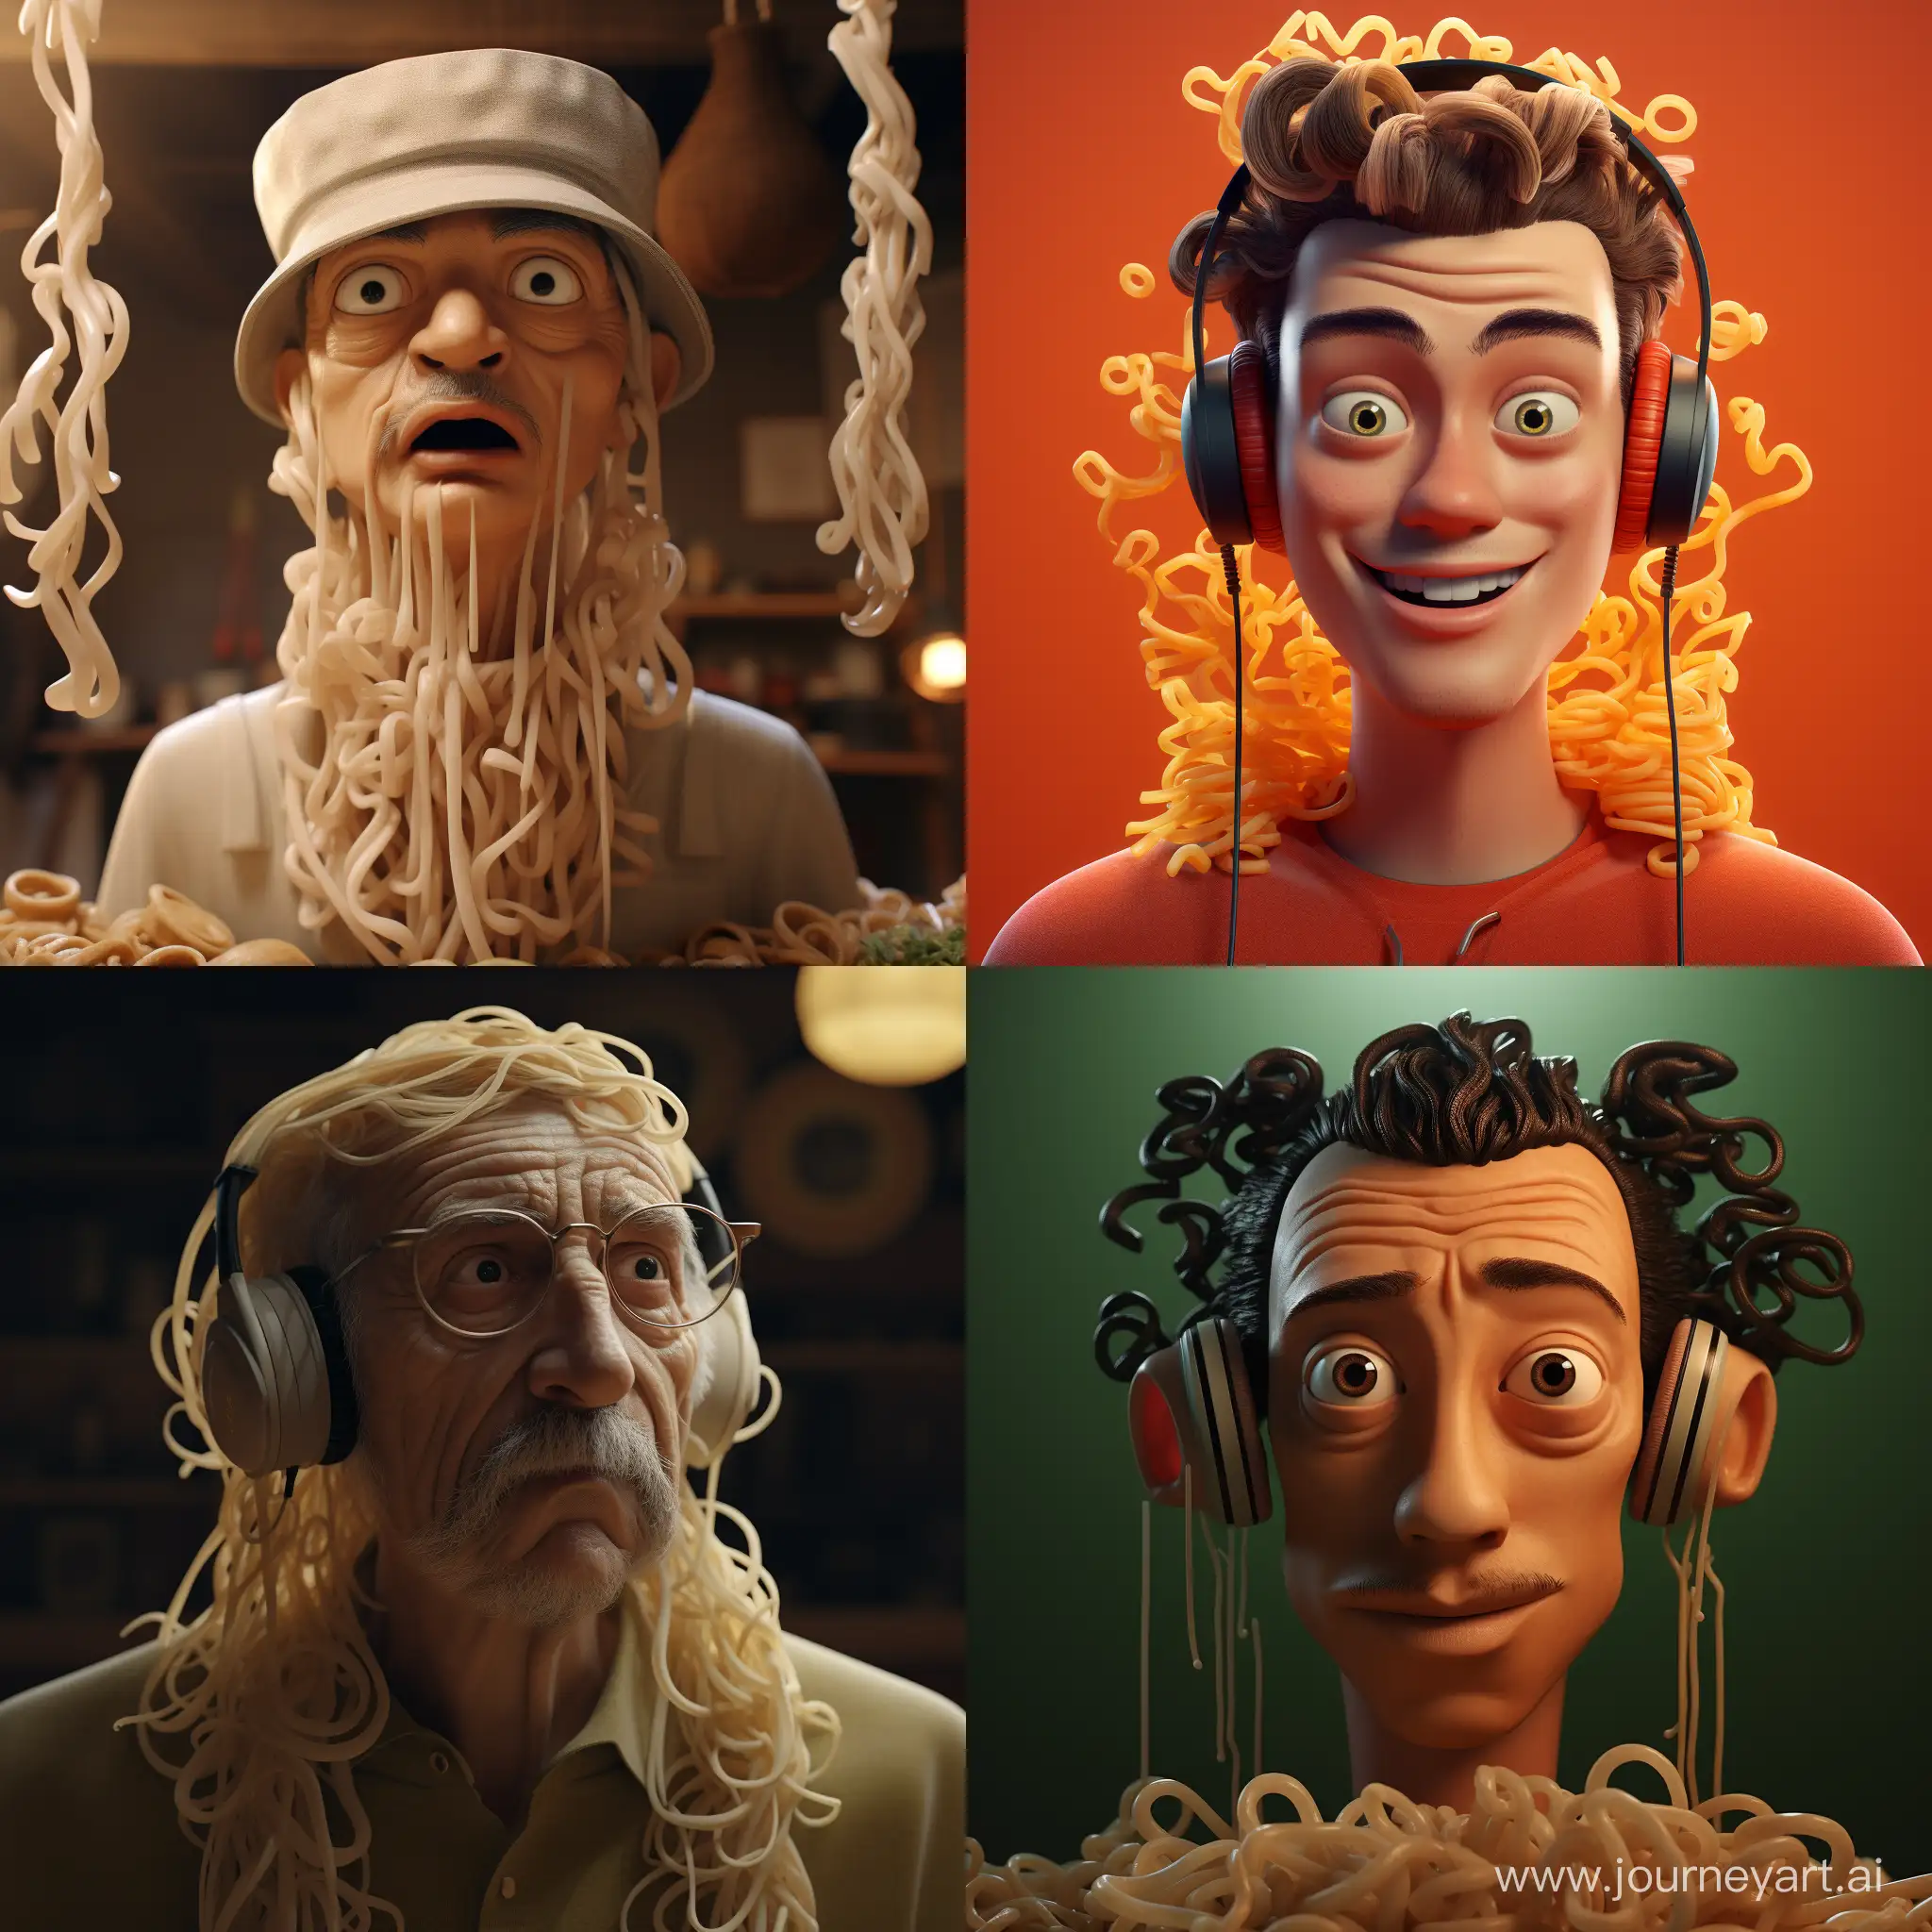 Playful-3D-Animation-Man-Wearing-Noodles-as-Earrings